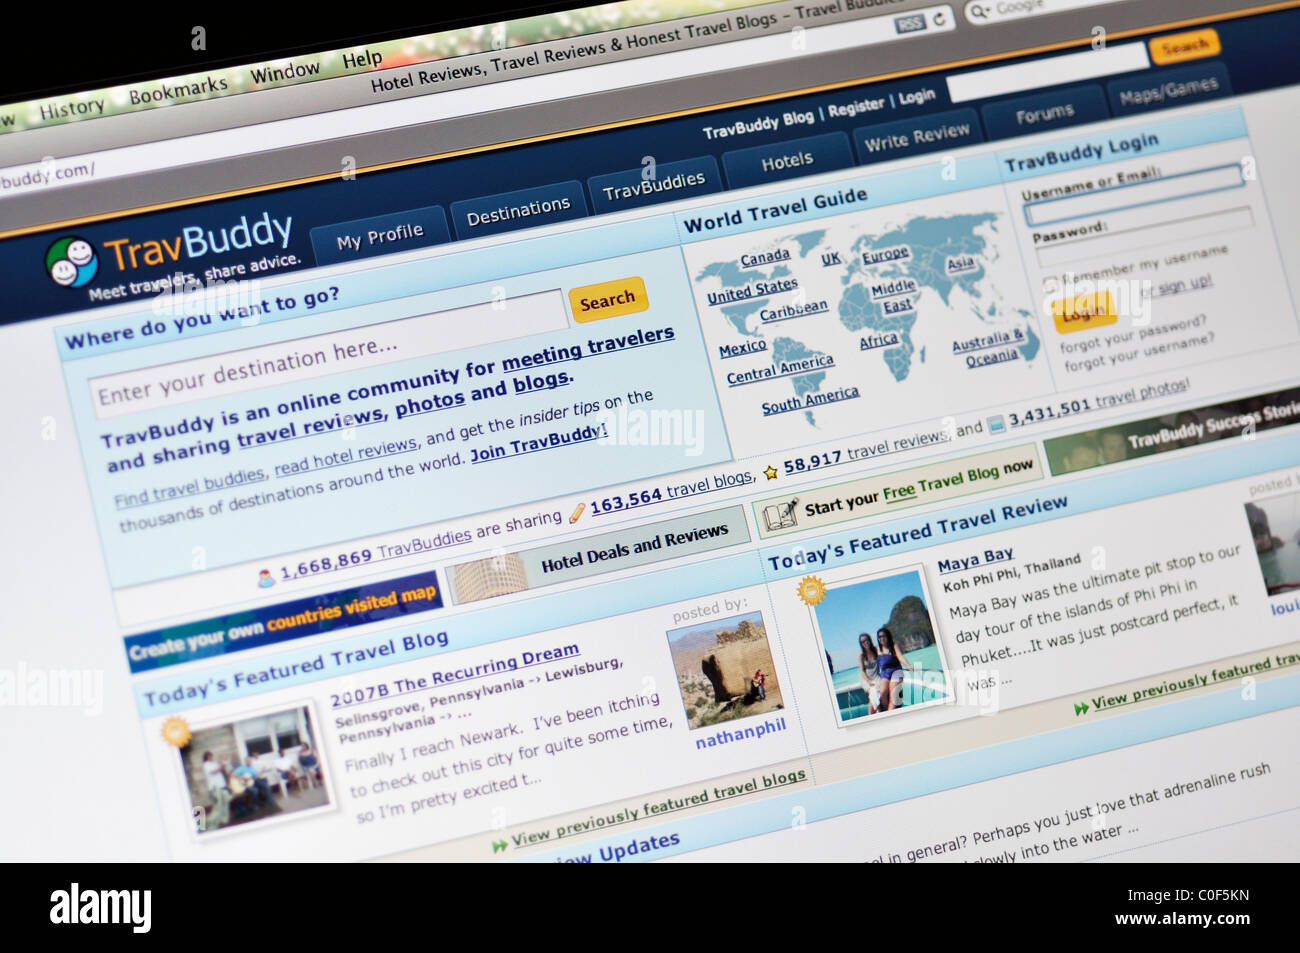 TravBuddy hotel review and travel blogs website Stock Photo